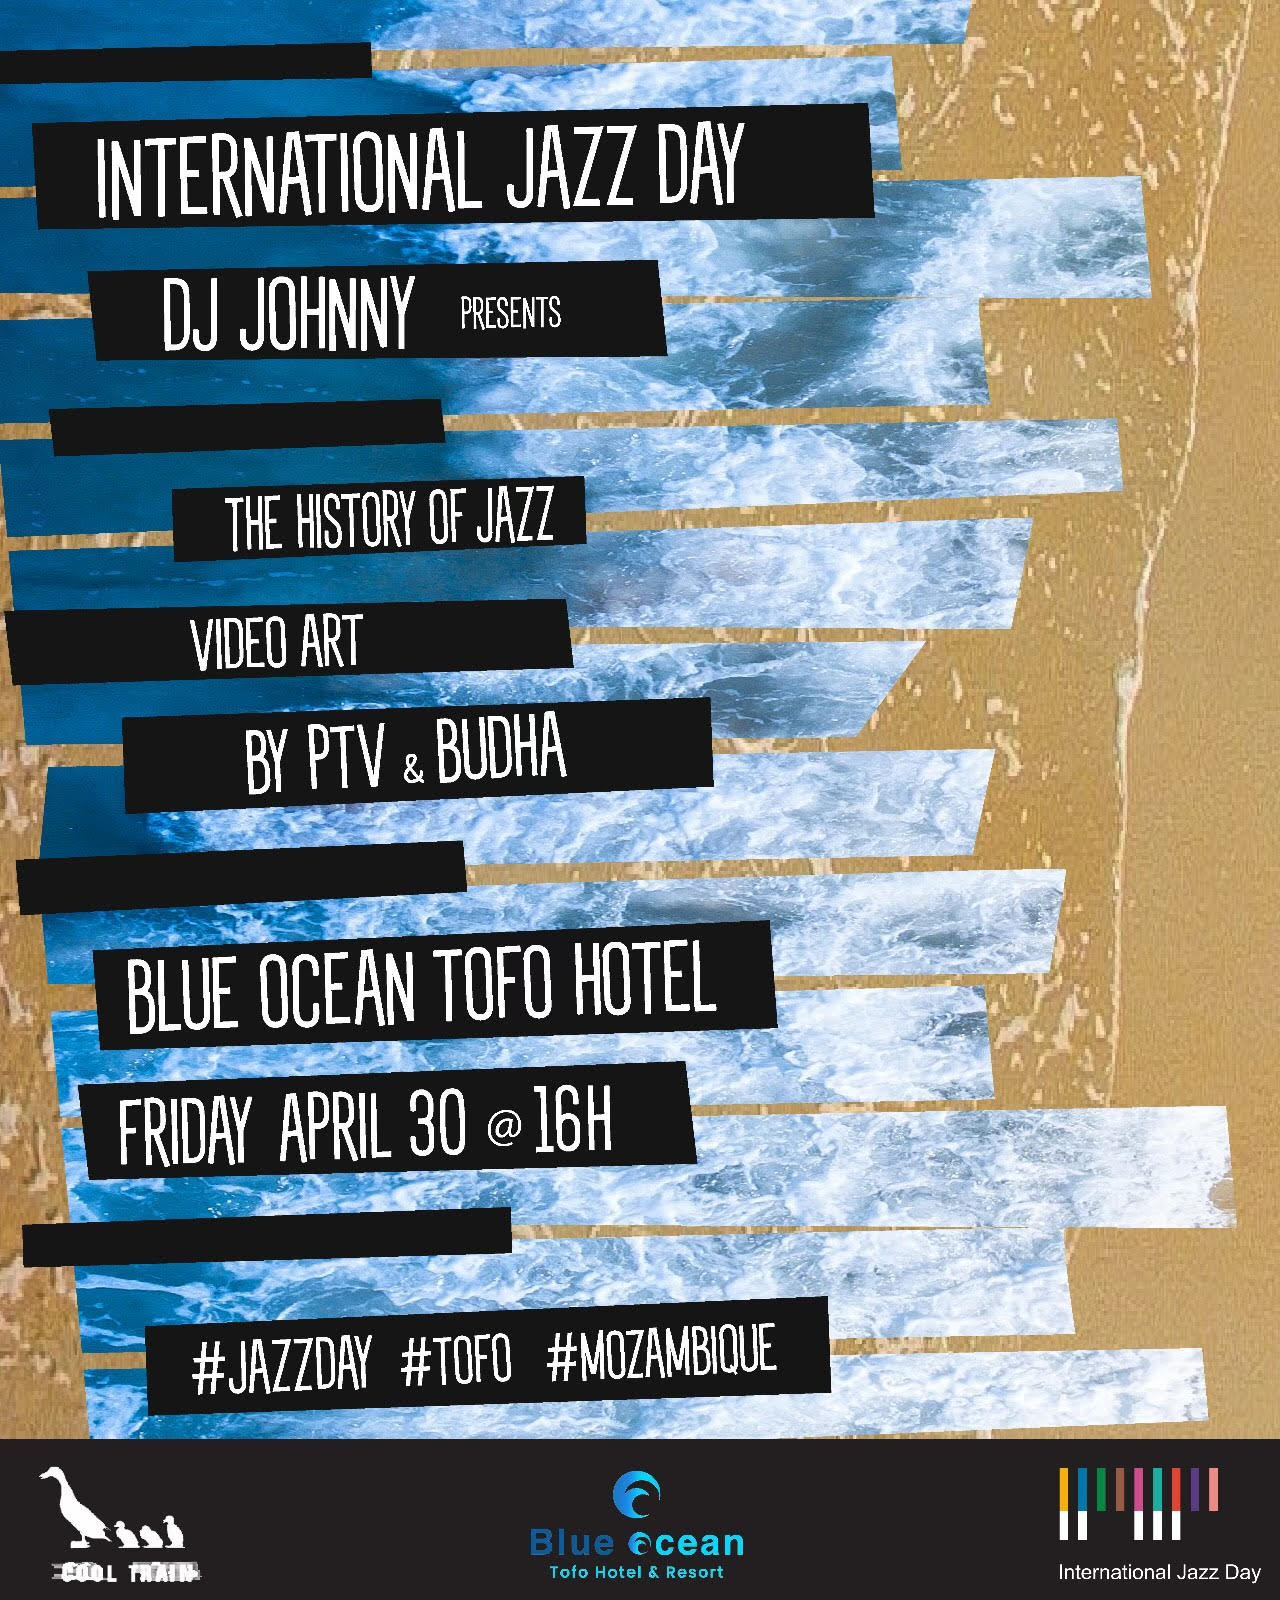 Come and celebrate International Jazz Day at Praia do Tofo, Mozambique!